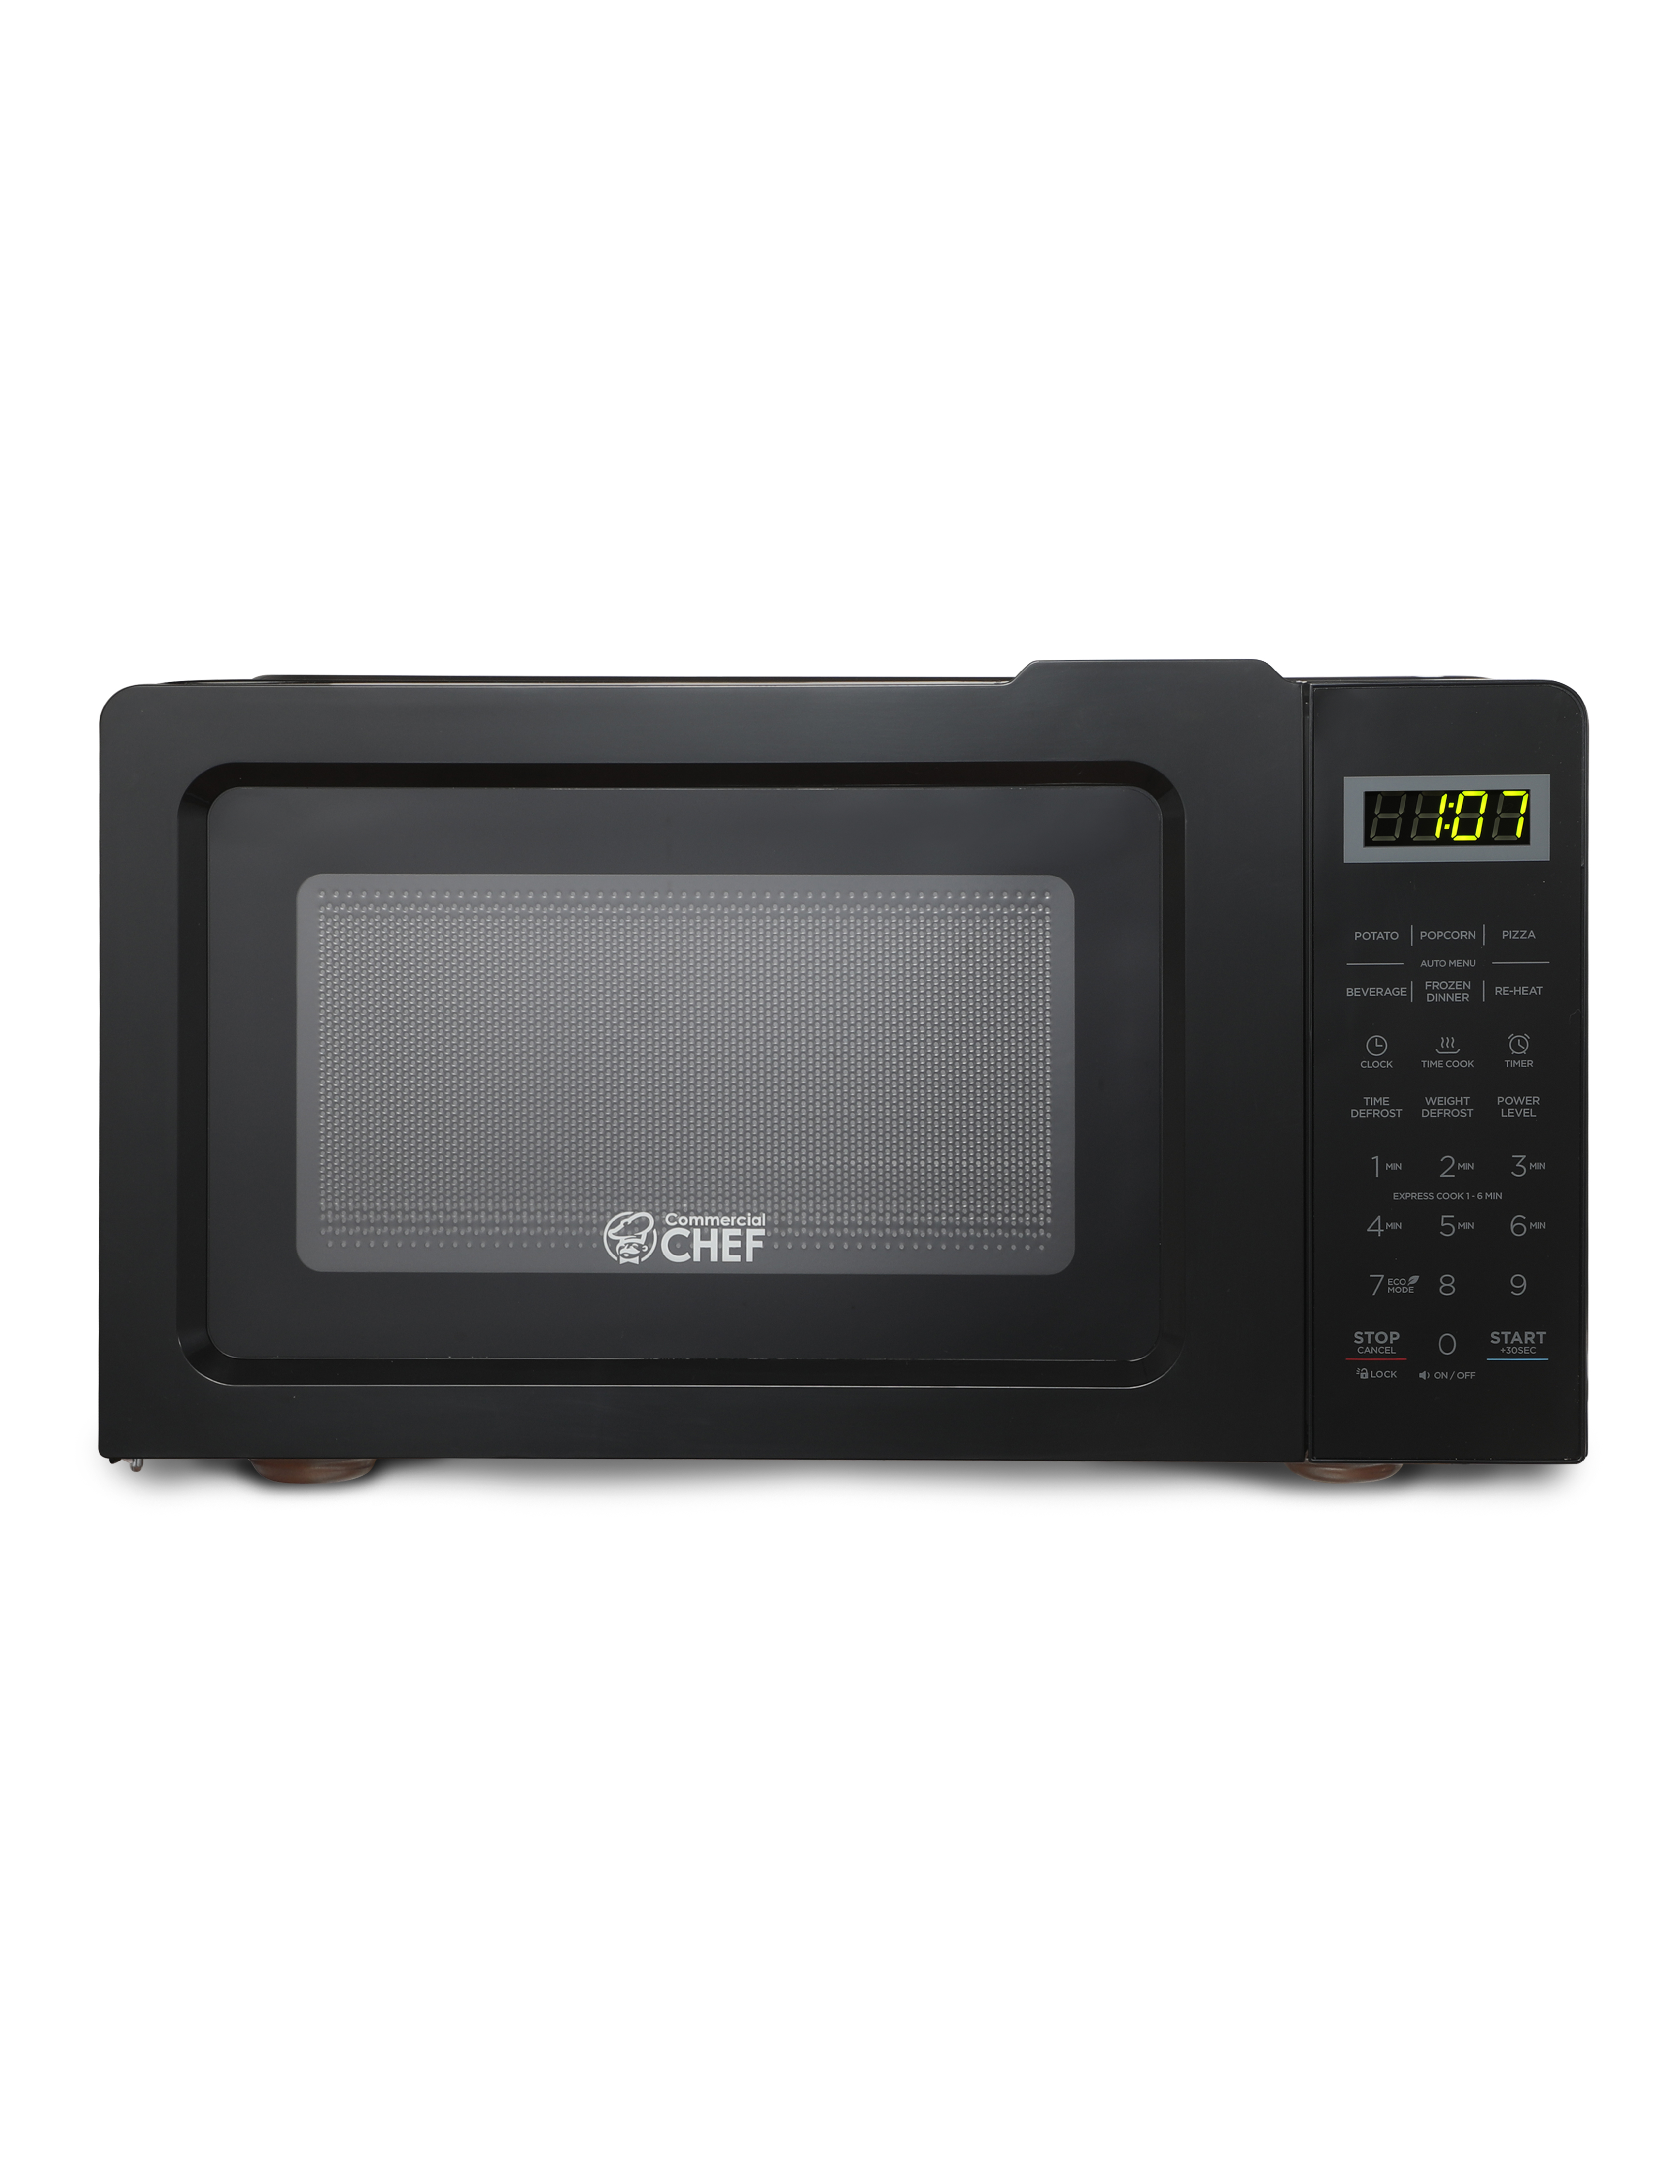 Commercial Chef CHM770B 0.7 Cubic Feet Microwave Oven, 700 Watt, Stainless Steel Front with Black Cabinet - image 1 of 7